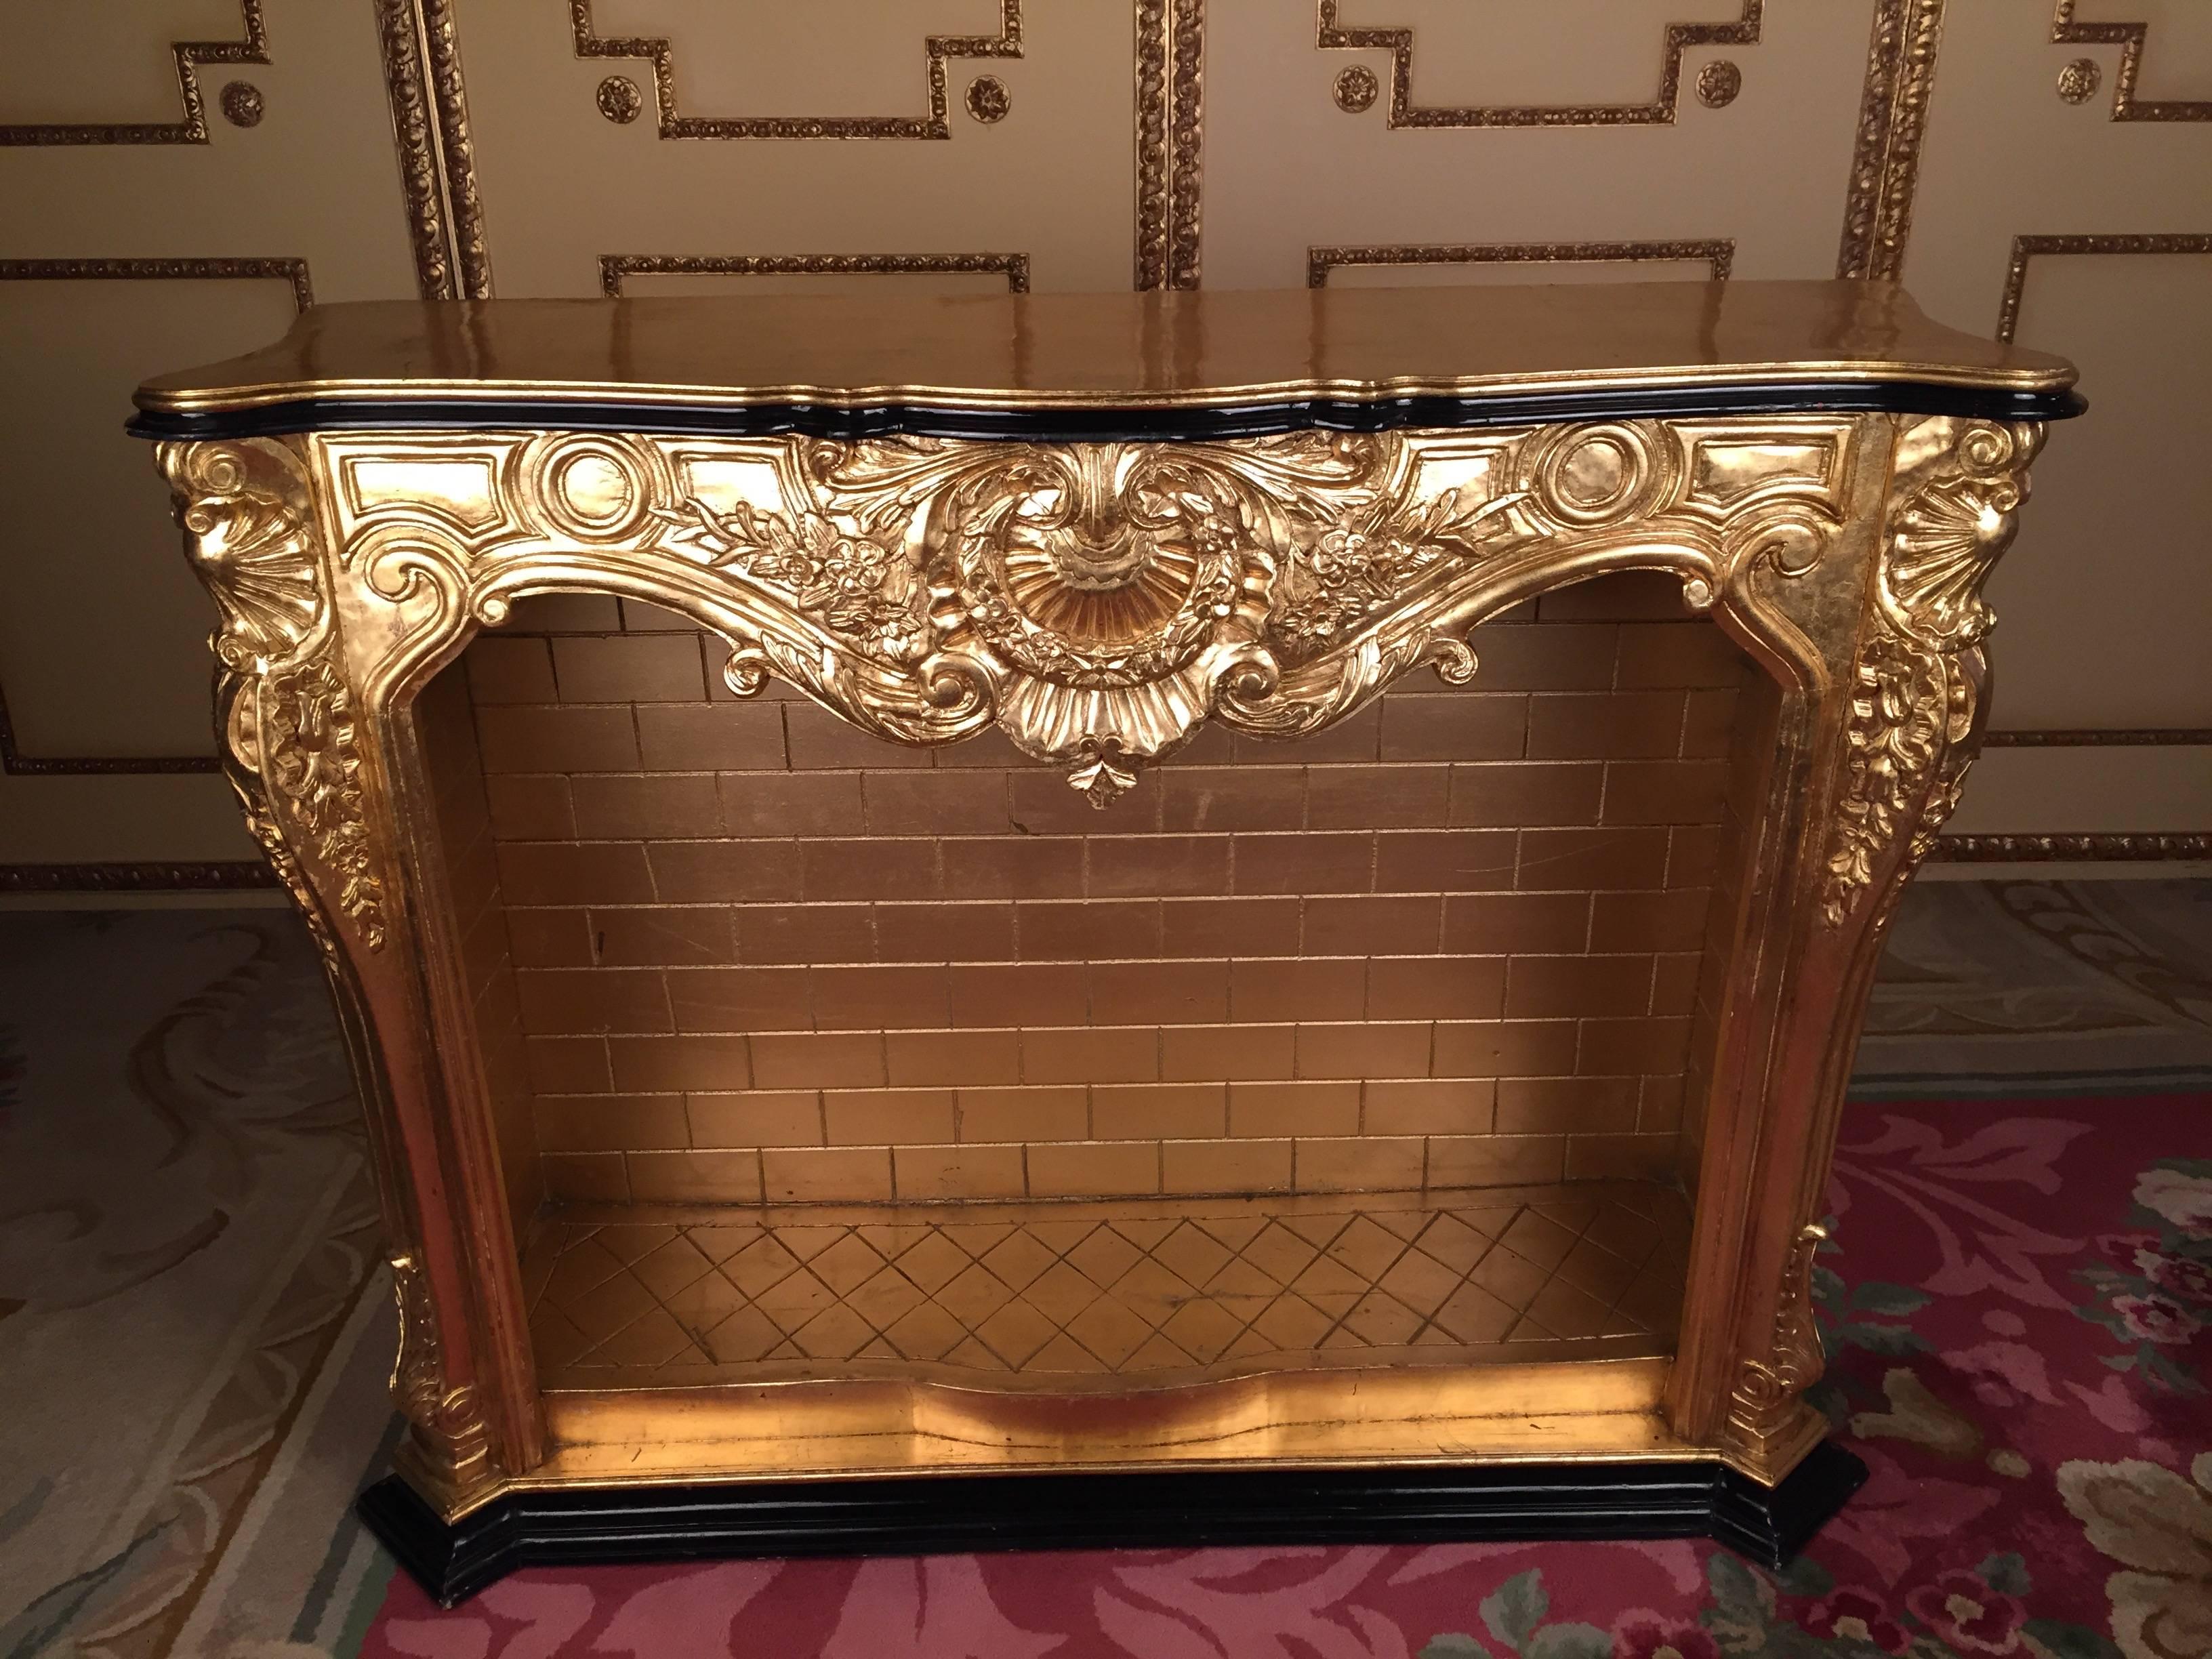 20th century Louis XV decorative fireplace
Solid beechwood, gold frame. In the center as well as on the flanking Rocaille-carving.
High quality and decorative fireplace.

Delivery time can take about 8-12 weeks.